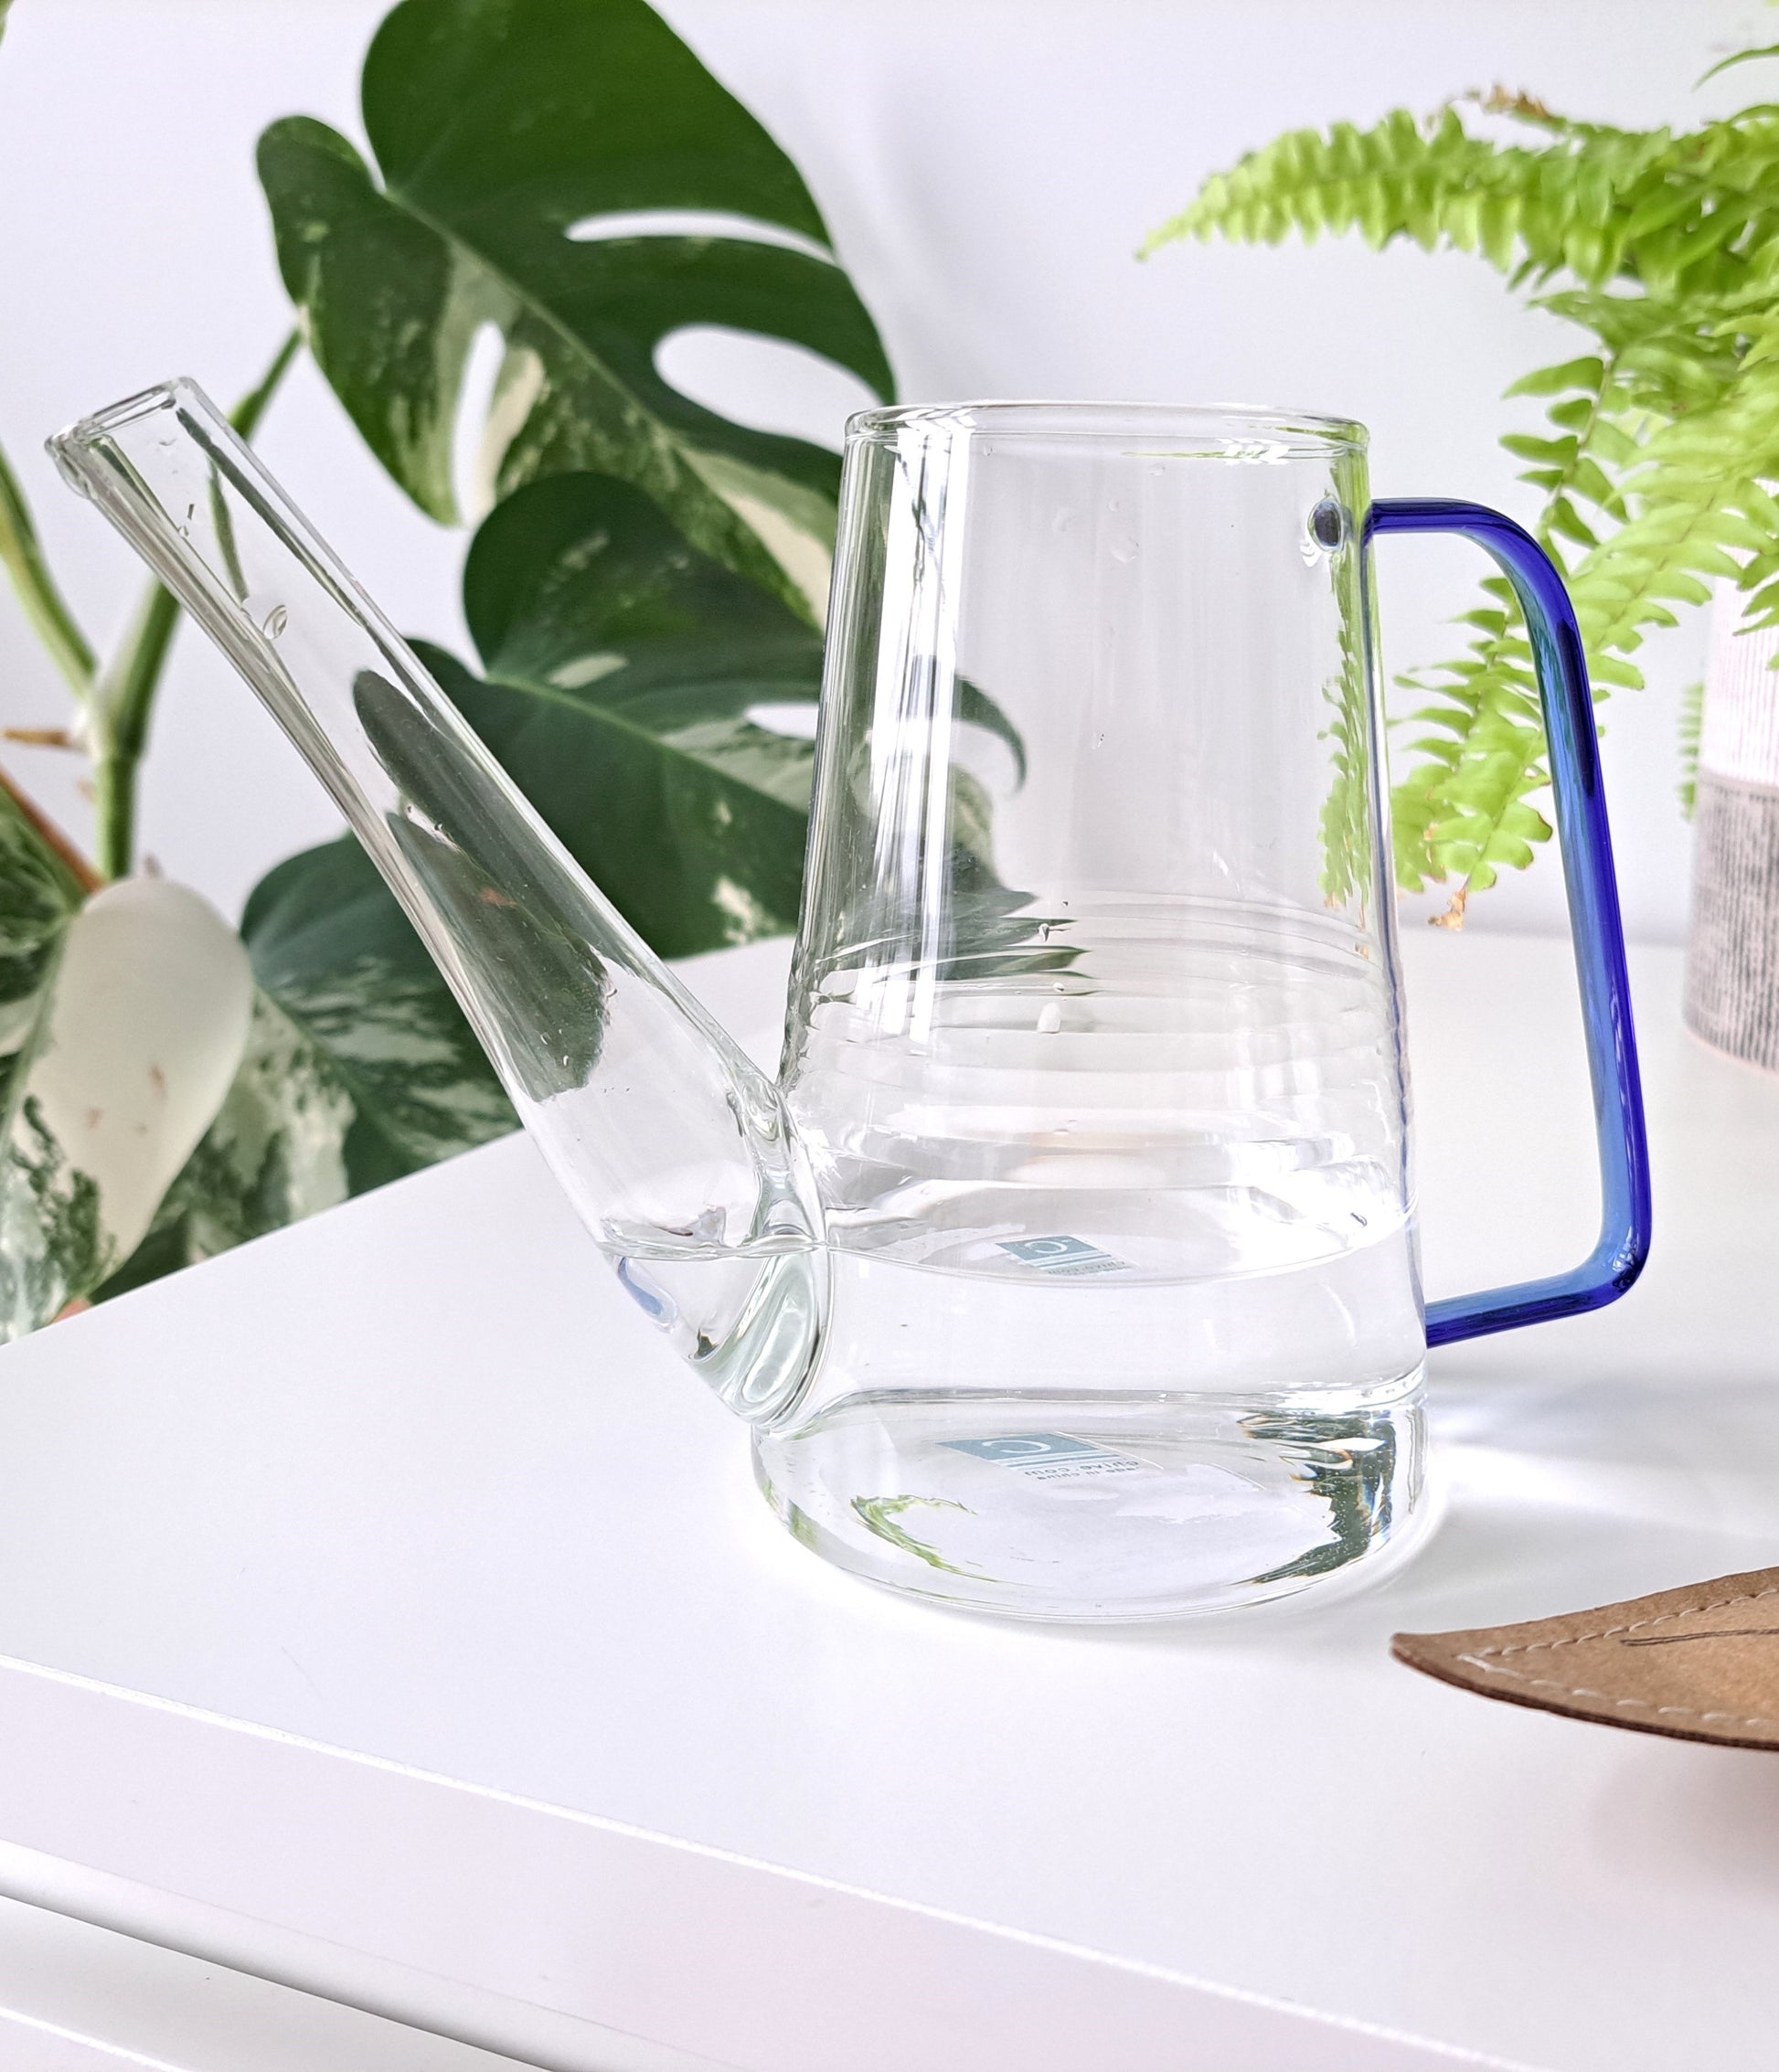 This extruded tube glass watering container is a perfect gift idea! Delicate and trendy, this water jug is great for getting into hard to reach spaces. Also makes a great vase for displaying fresh cut flowers. Comes with rustic metal snippers in the pouch.